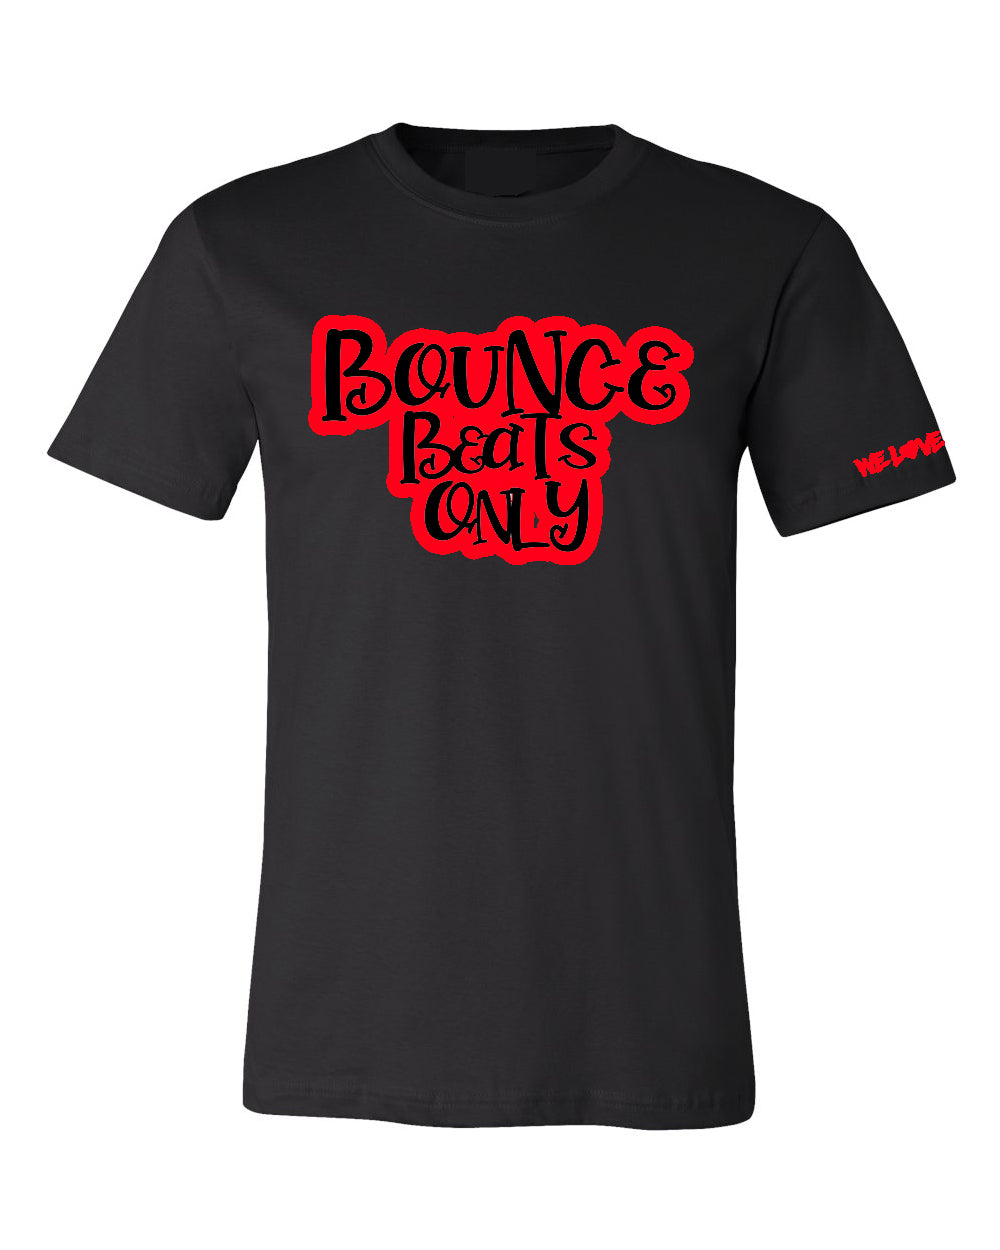 Bounce Beats Only - Tshirt